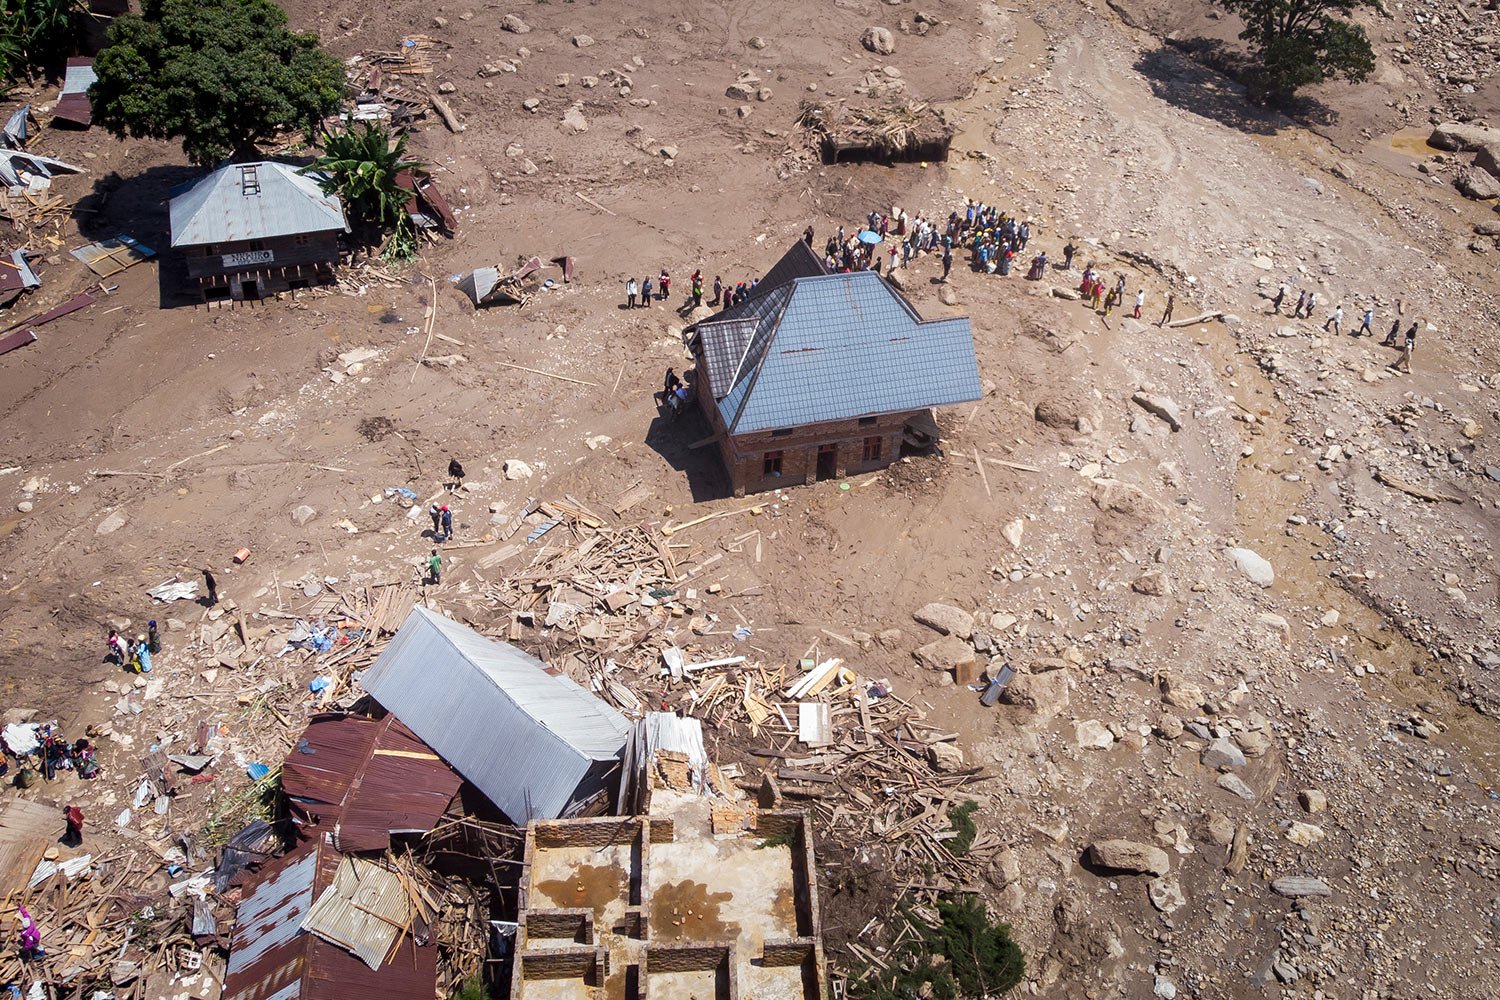  Survivors walk amidst debris next to destroyed buildings in the aftermath of floods in the village of Nyamukubi, South Kivu province, in Congo Monday, May 8, 2023. (AP Photo/Justin Kabumba) 